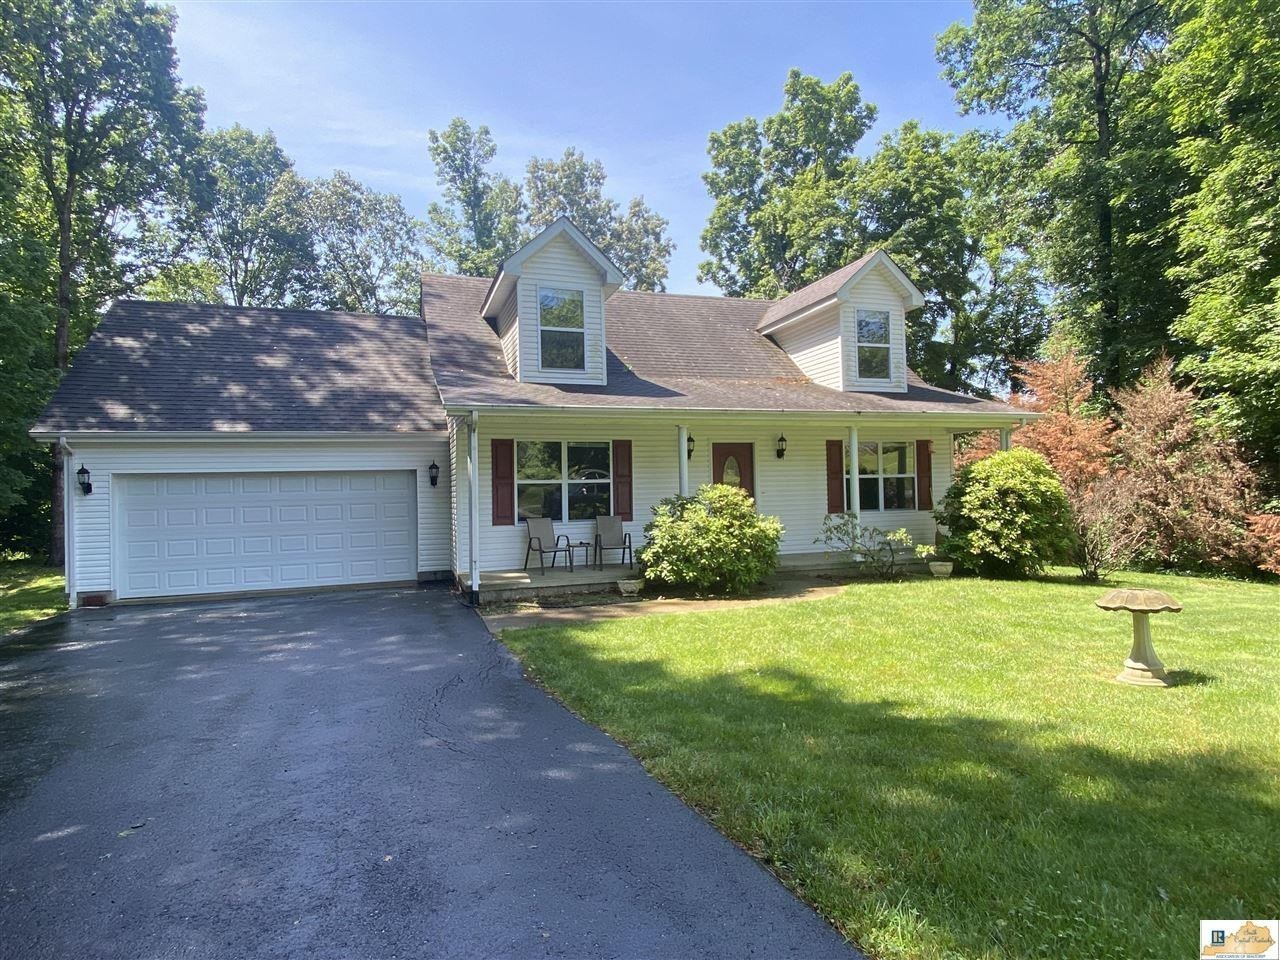 2. 450 Colonial Heights Road